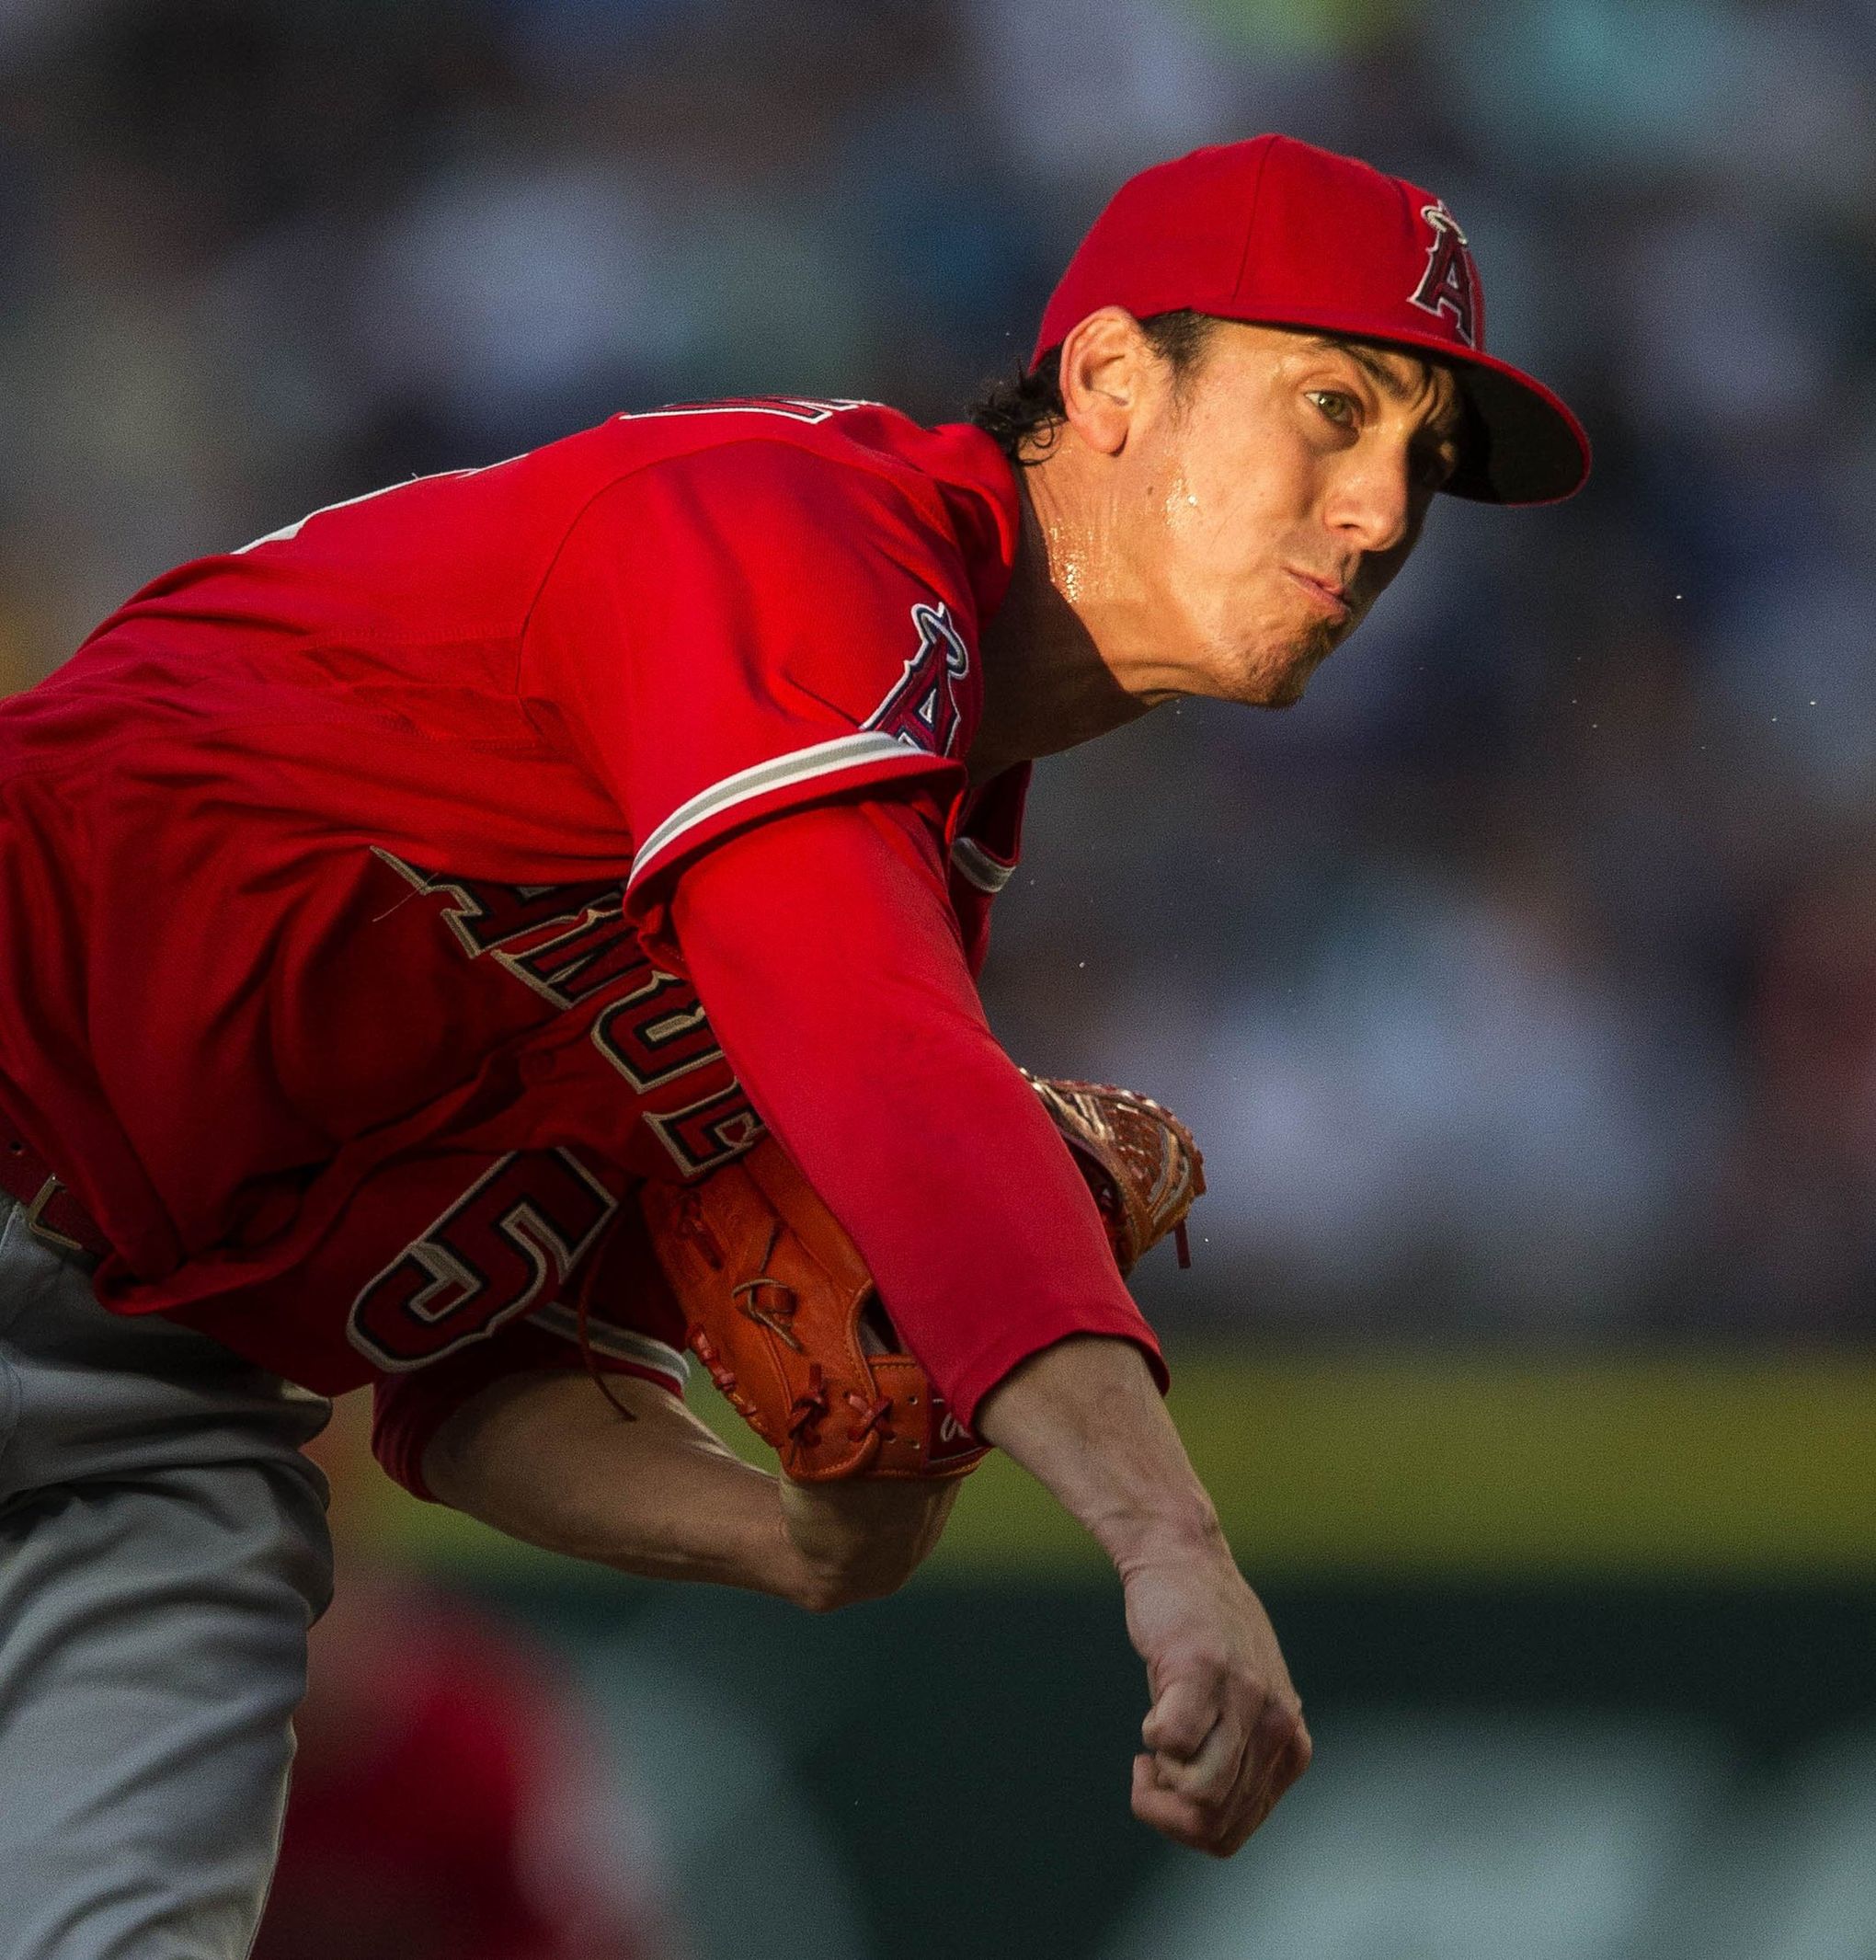 Tim Lincecum sharp in showcase for big league scouts